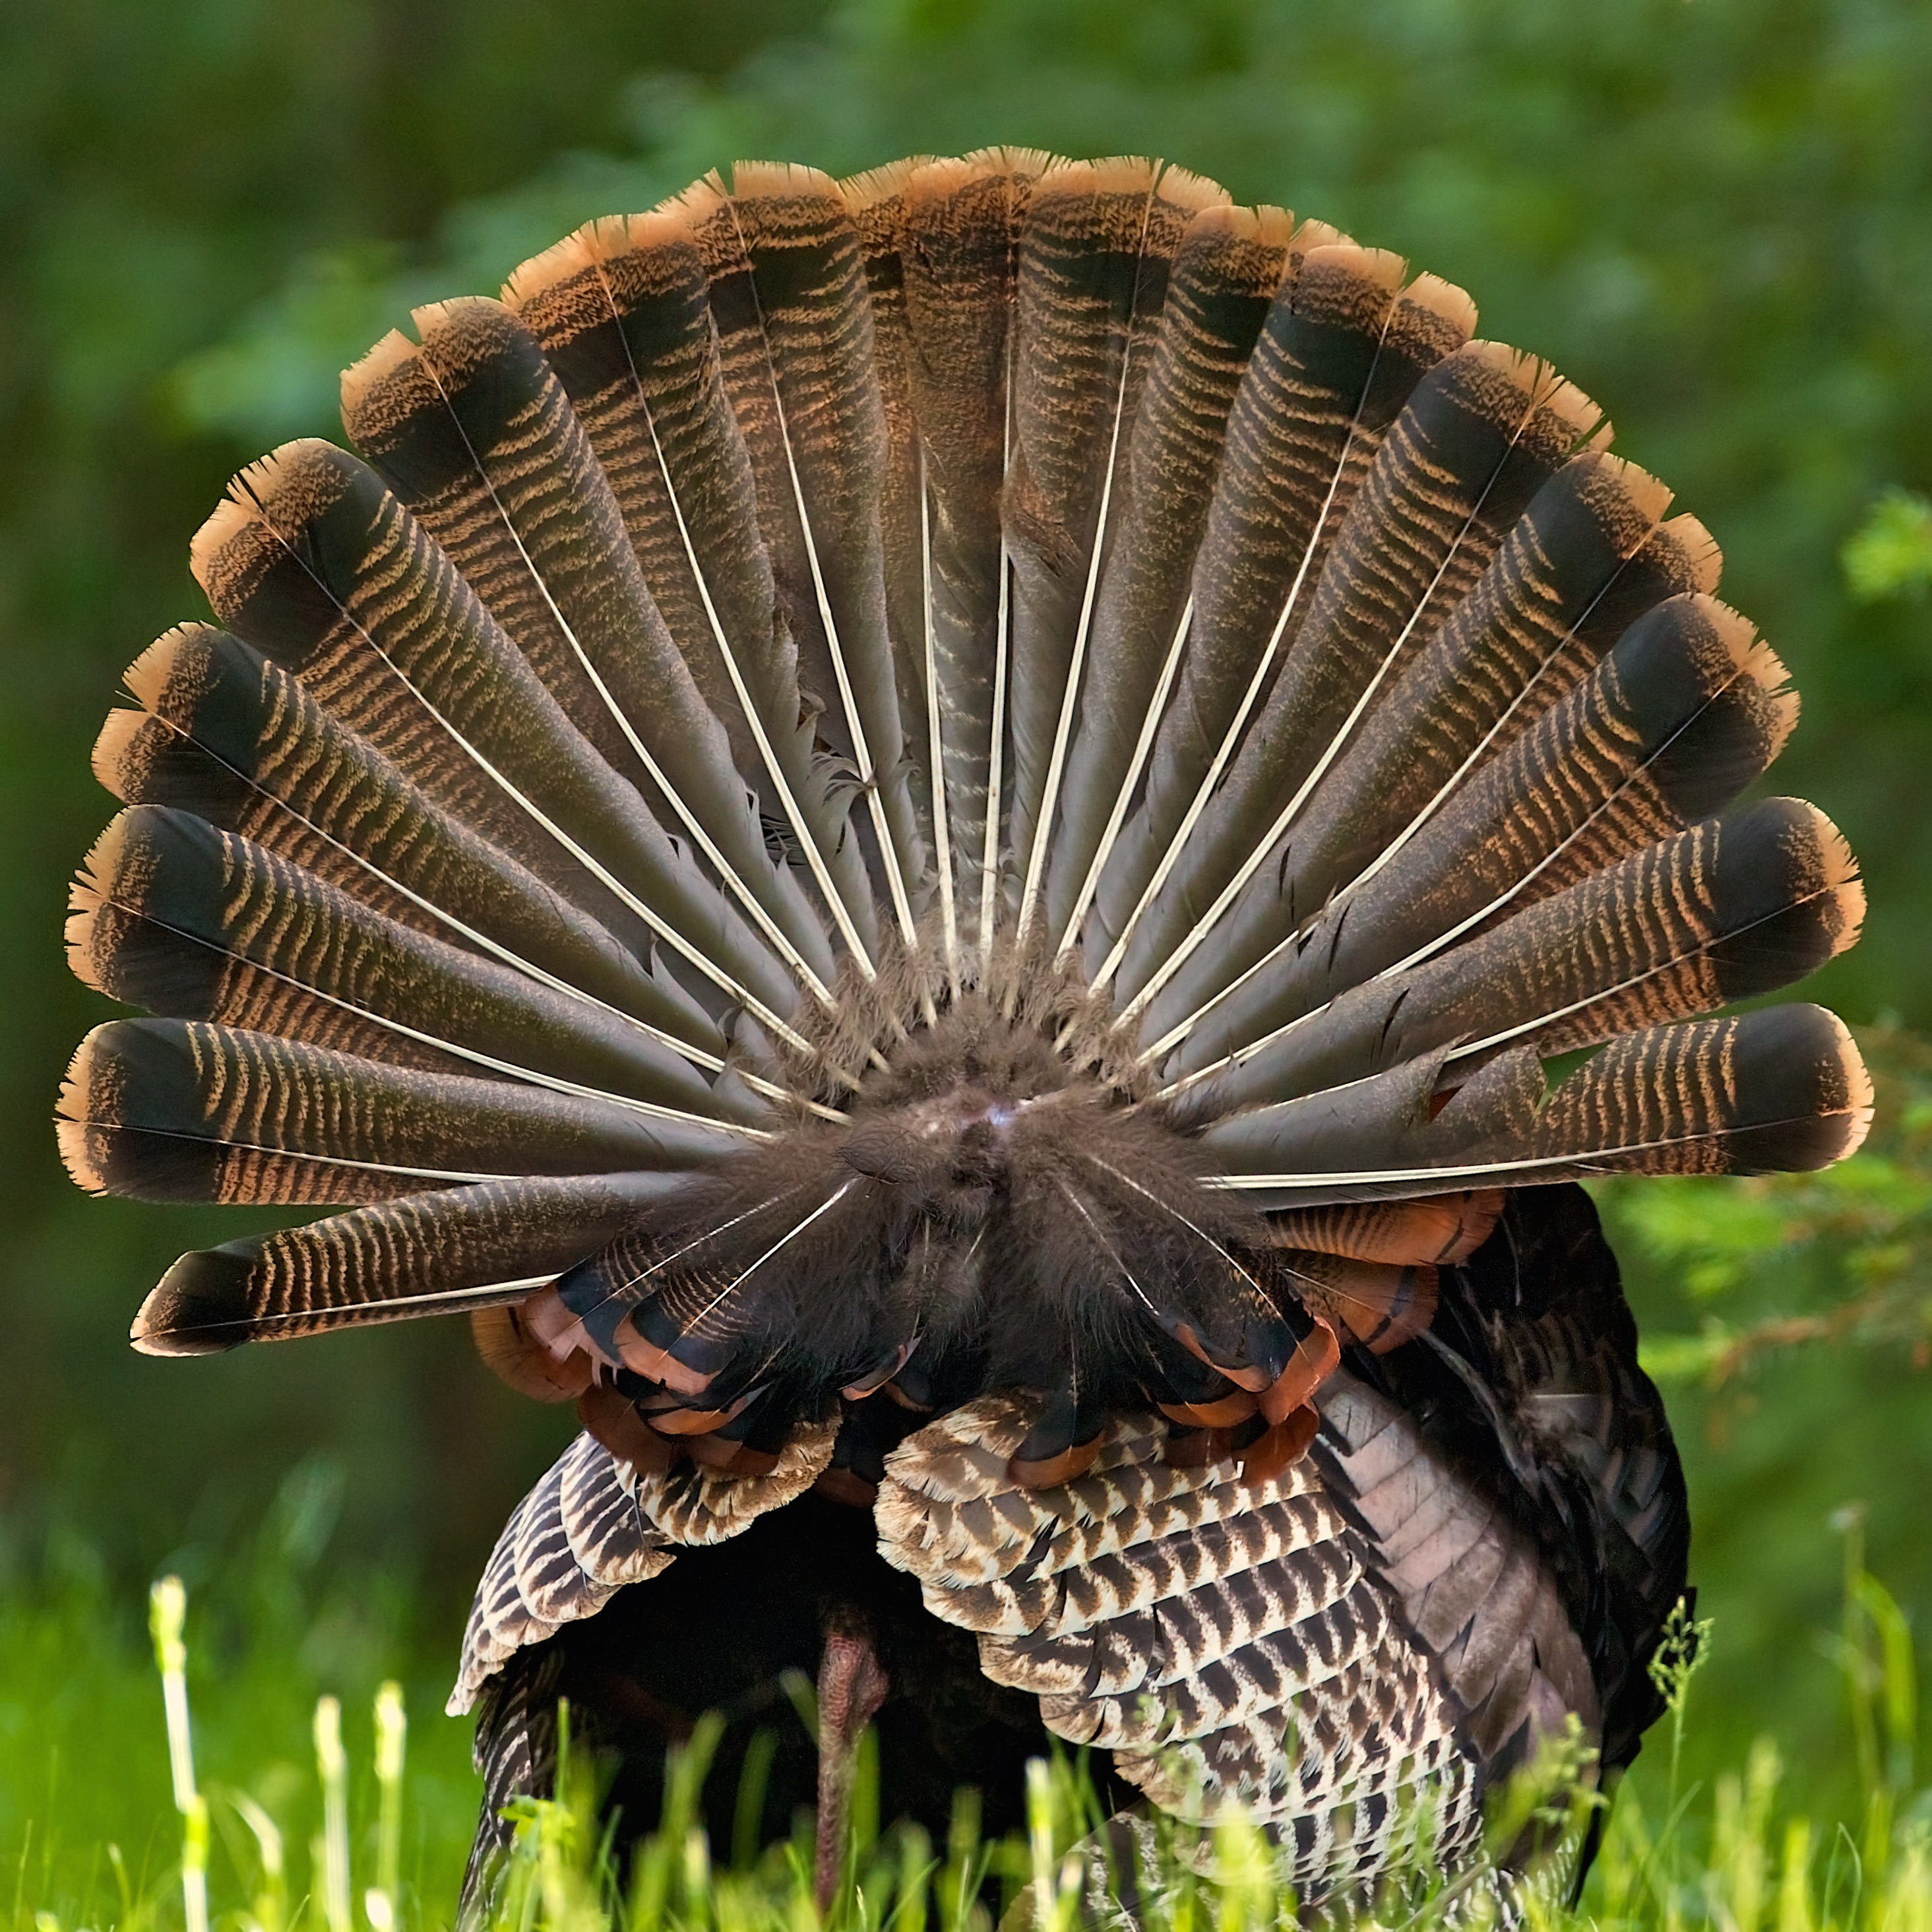 Rear View of Single Wild Turkey with Full Tail Feathers - Wrapped Canvas Photograph Ebern Designs Size: 12 W x 12 H